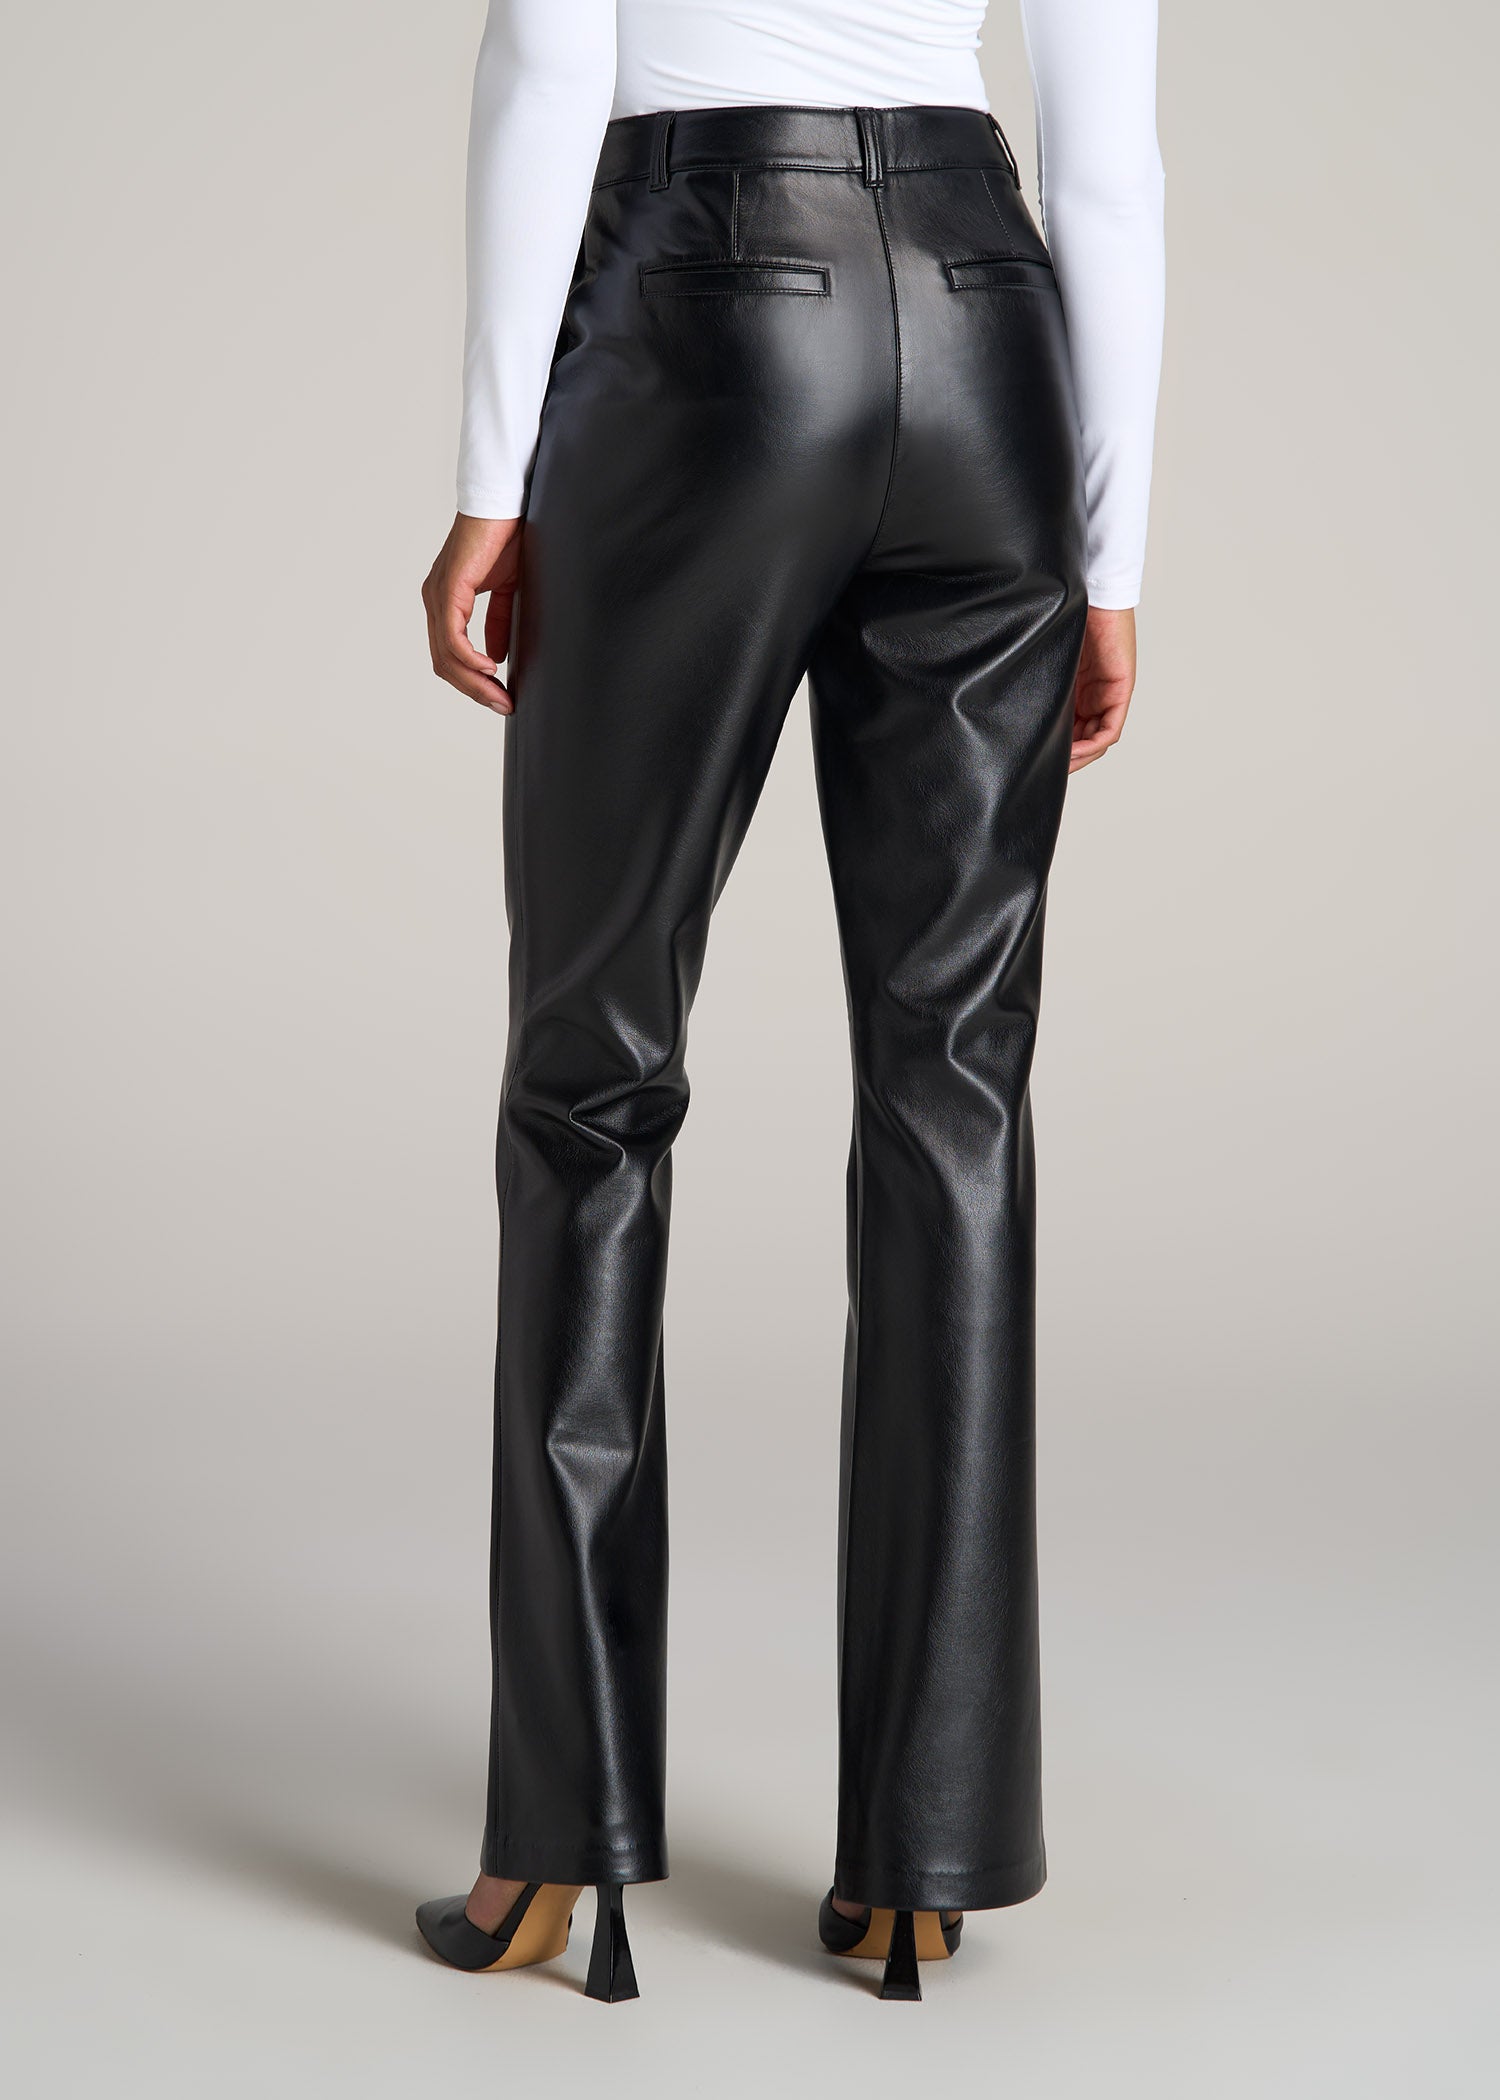 Black Leather Pants - Womens Leather Pants